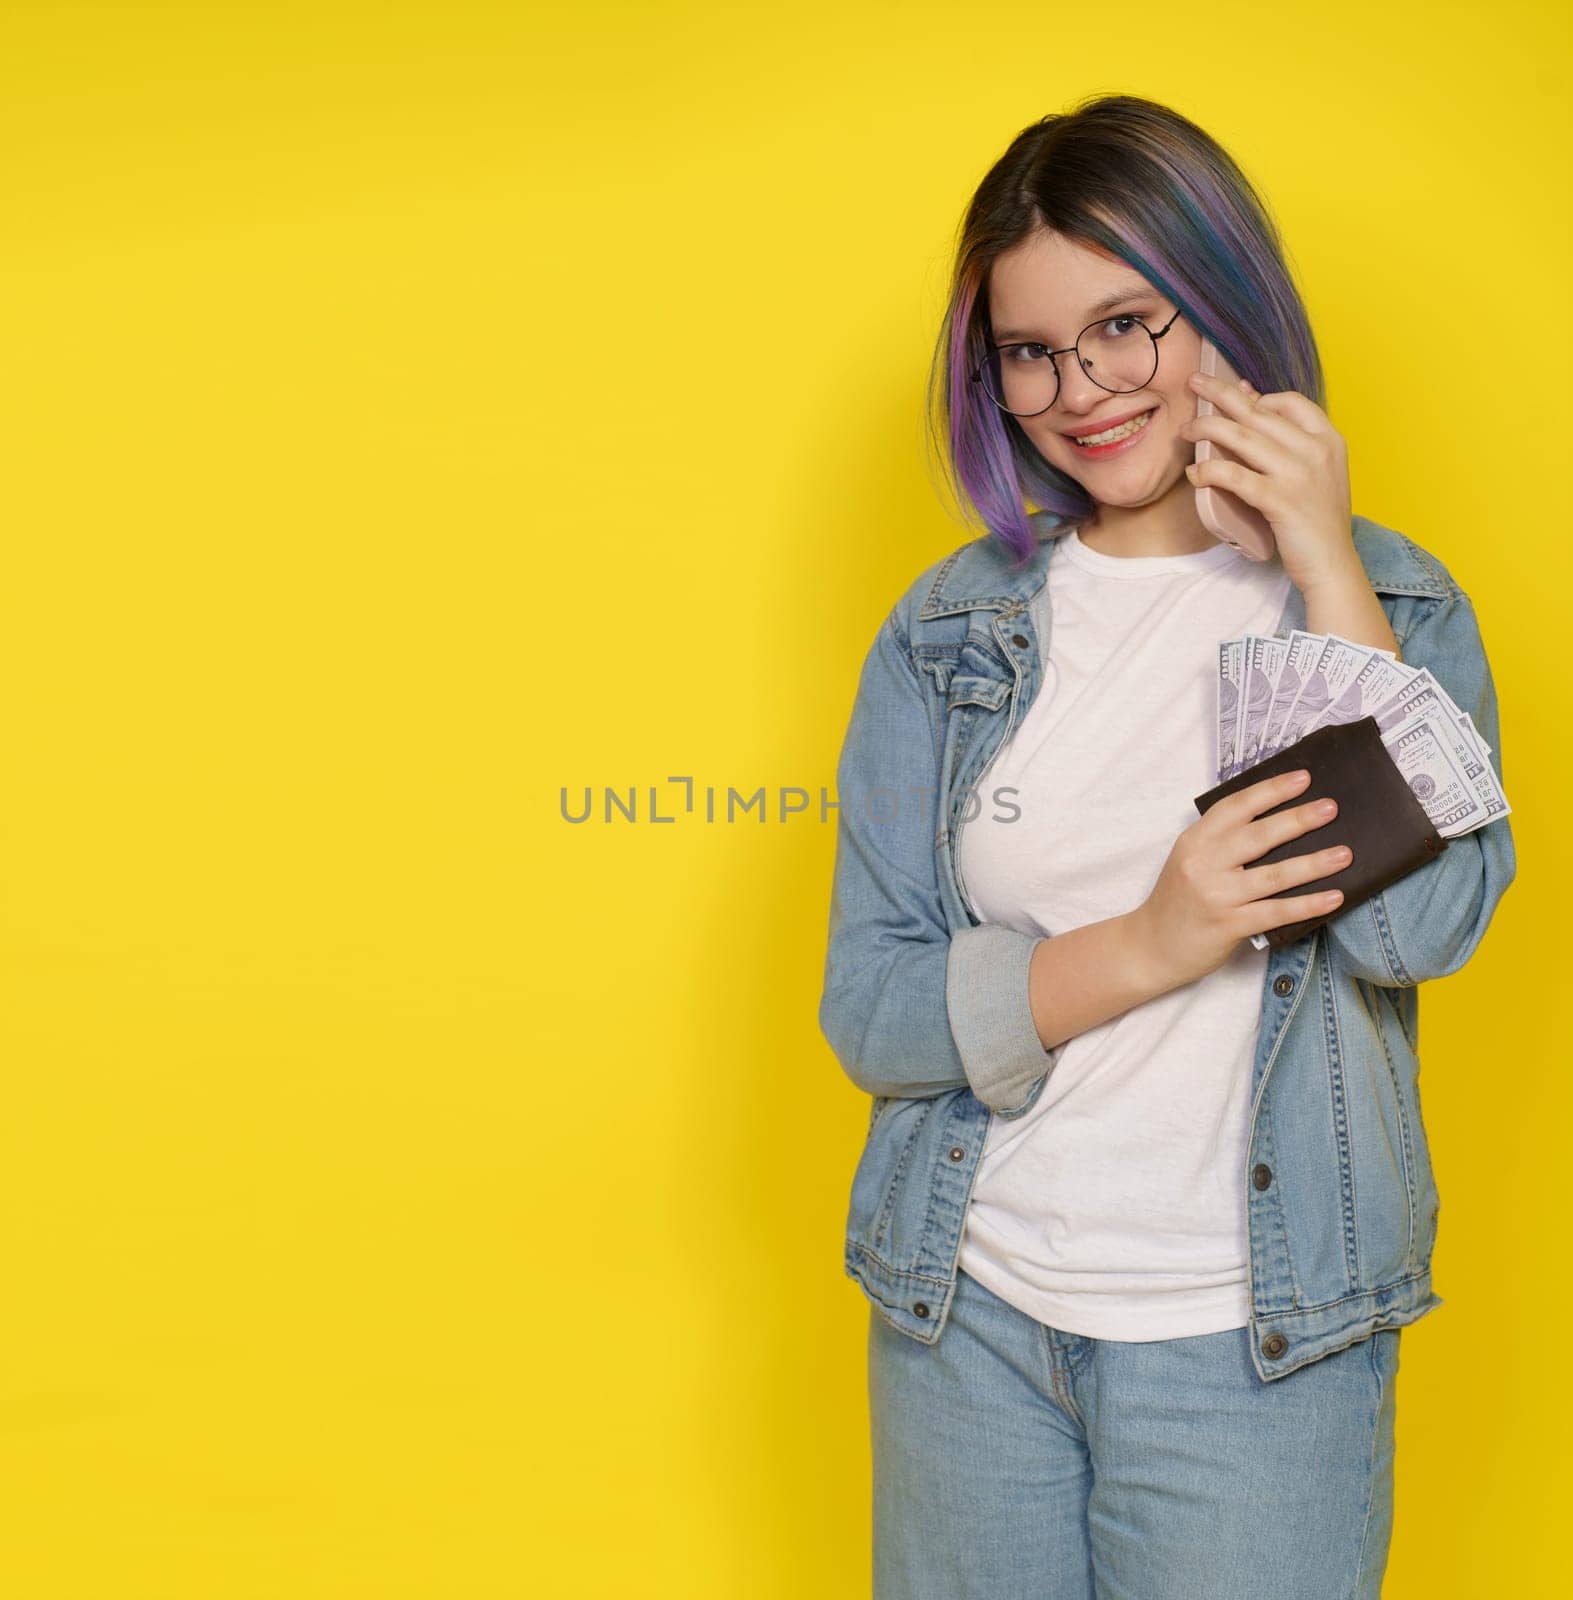 Financial Independence Associated With Managing Money In Modern And Confident Manner. Happy Smiling Teenager Girl With Wallet Full Of Money And Mobile Phone Isolated On Yellow With Copy Space by LipikStockMedia